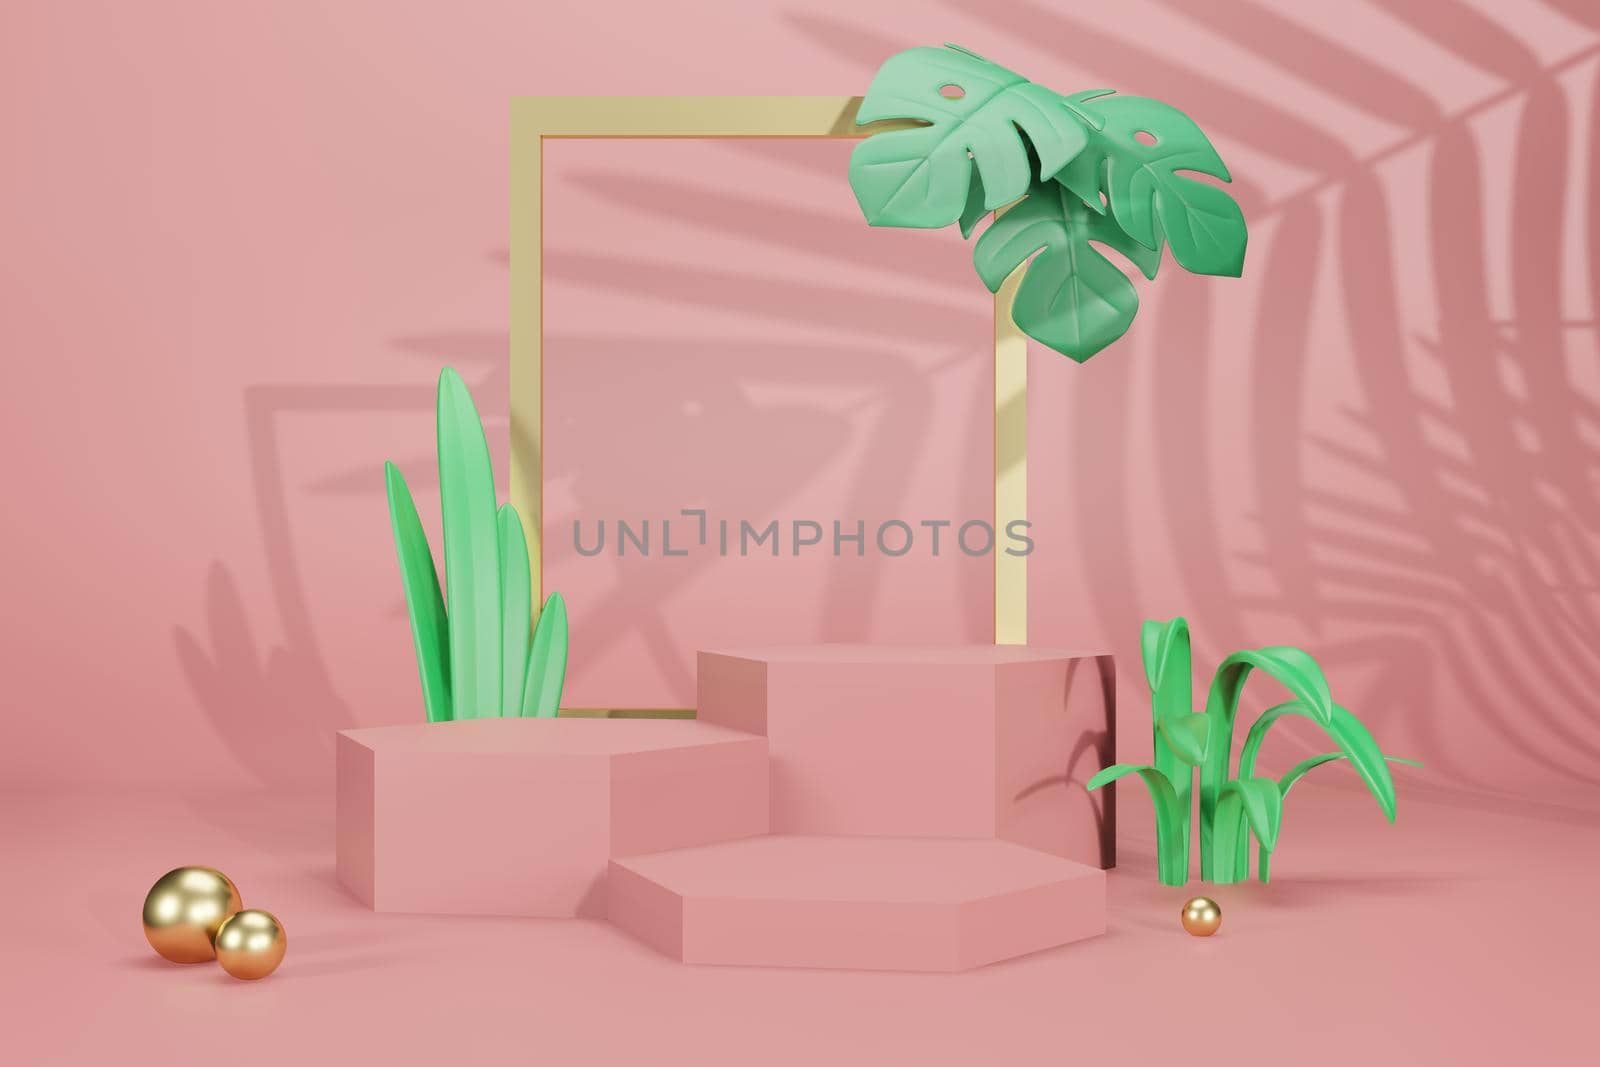 3d rendering illustration of podium display showcase for product placement in minimal design. podium stage showcase